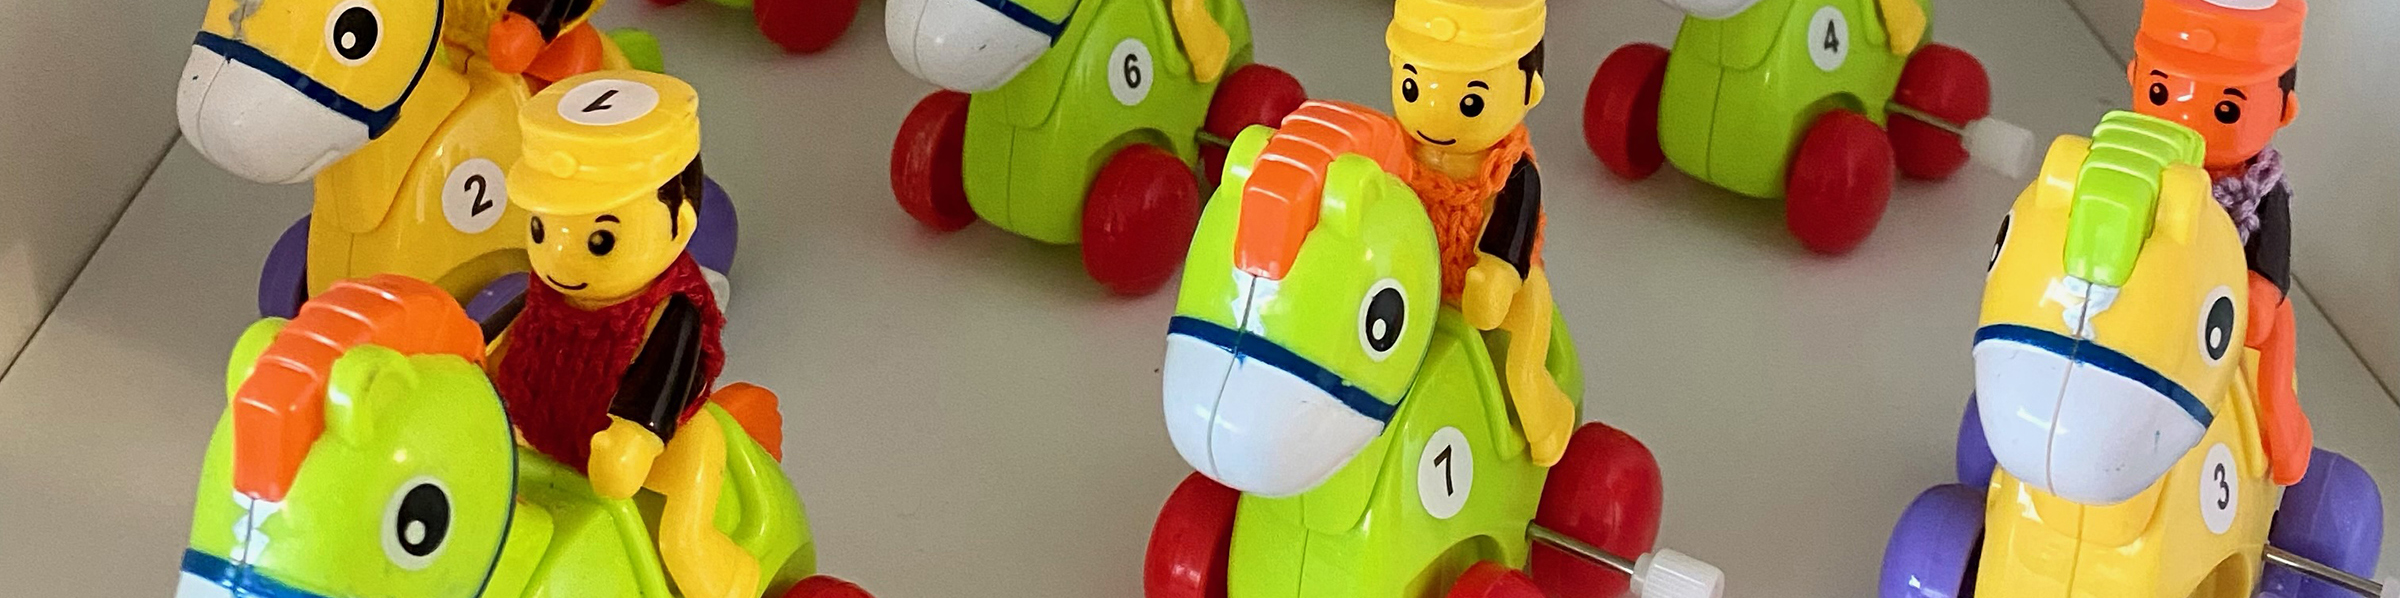 a row of wind-up toy horses